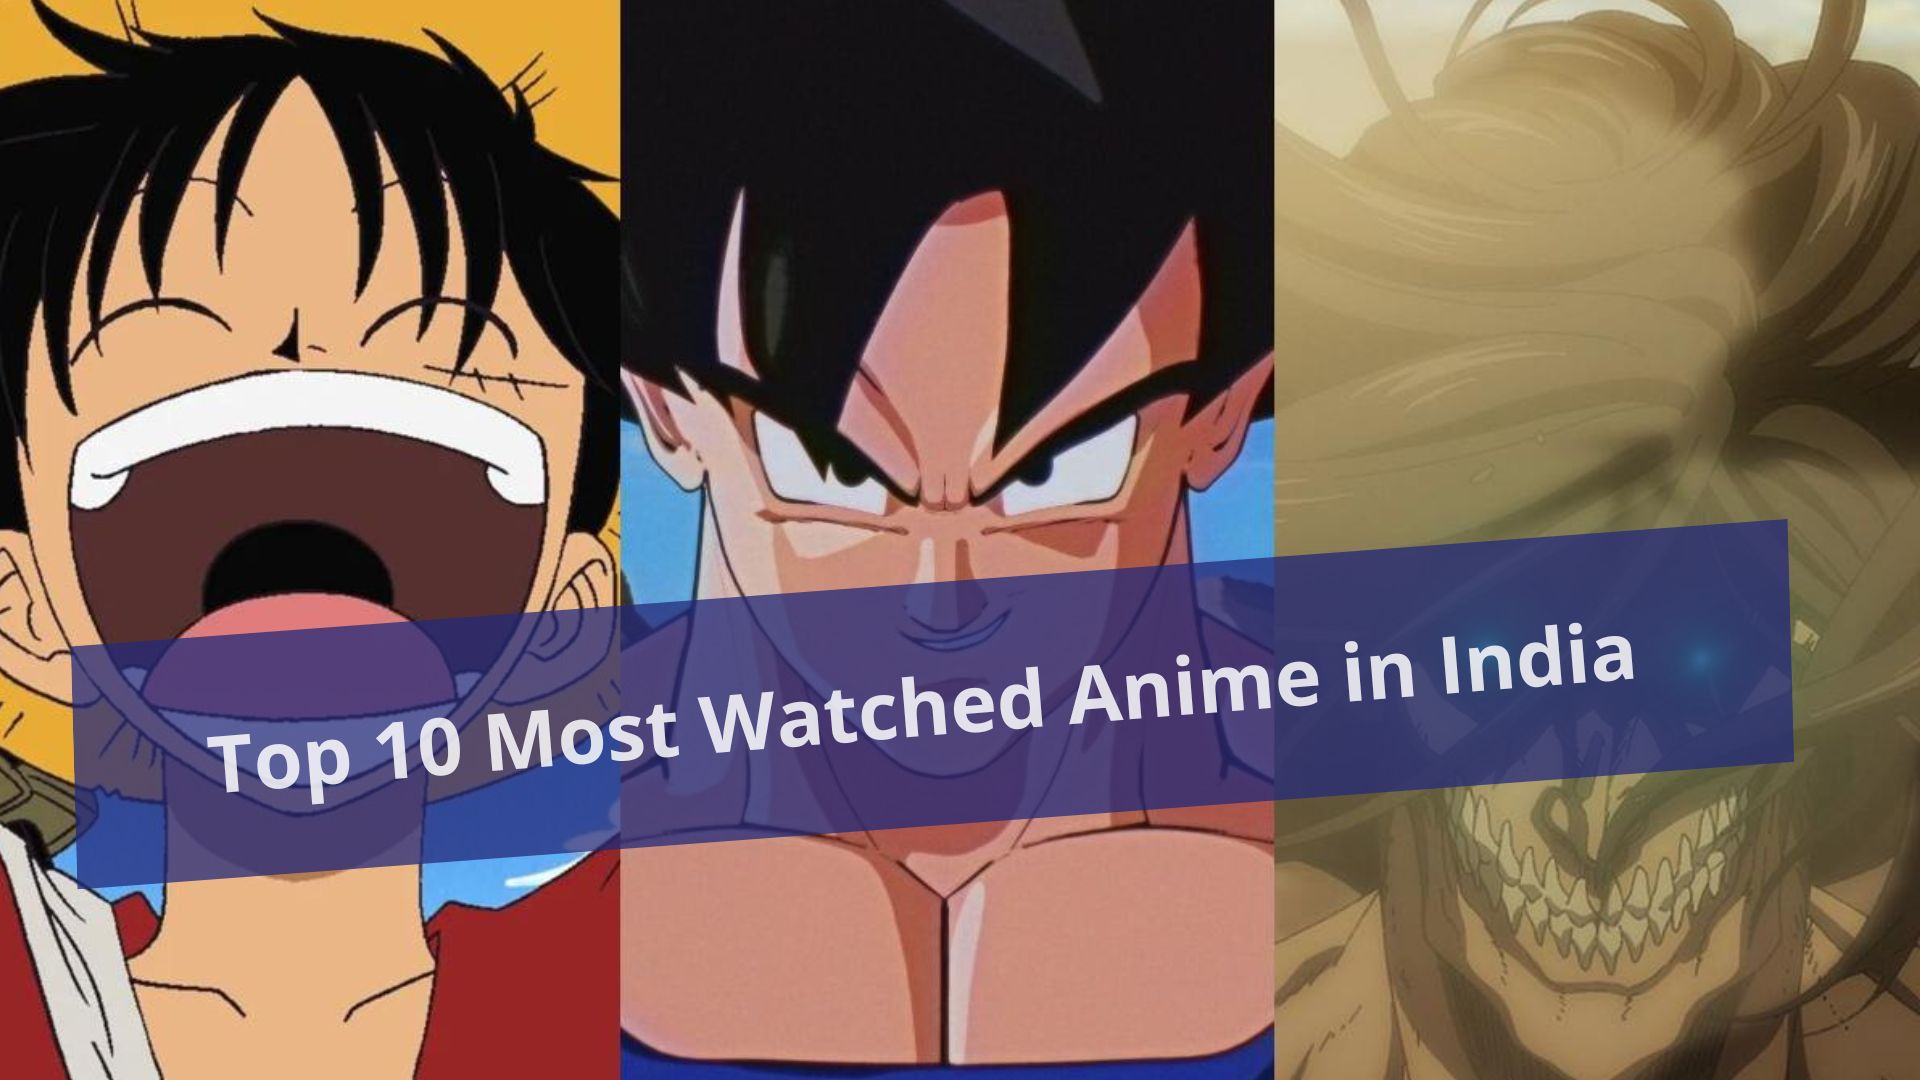 Top 10 Most Watched Anime in India